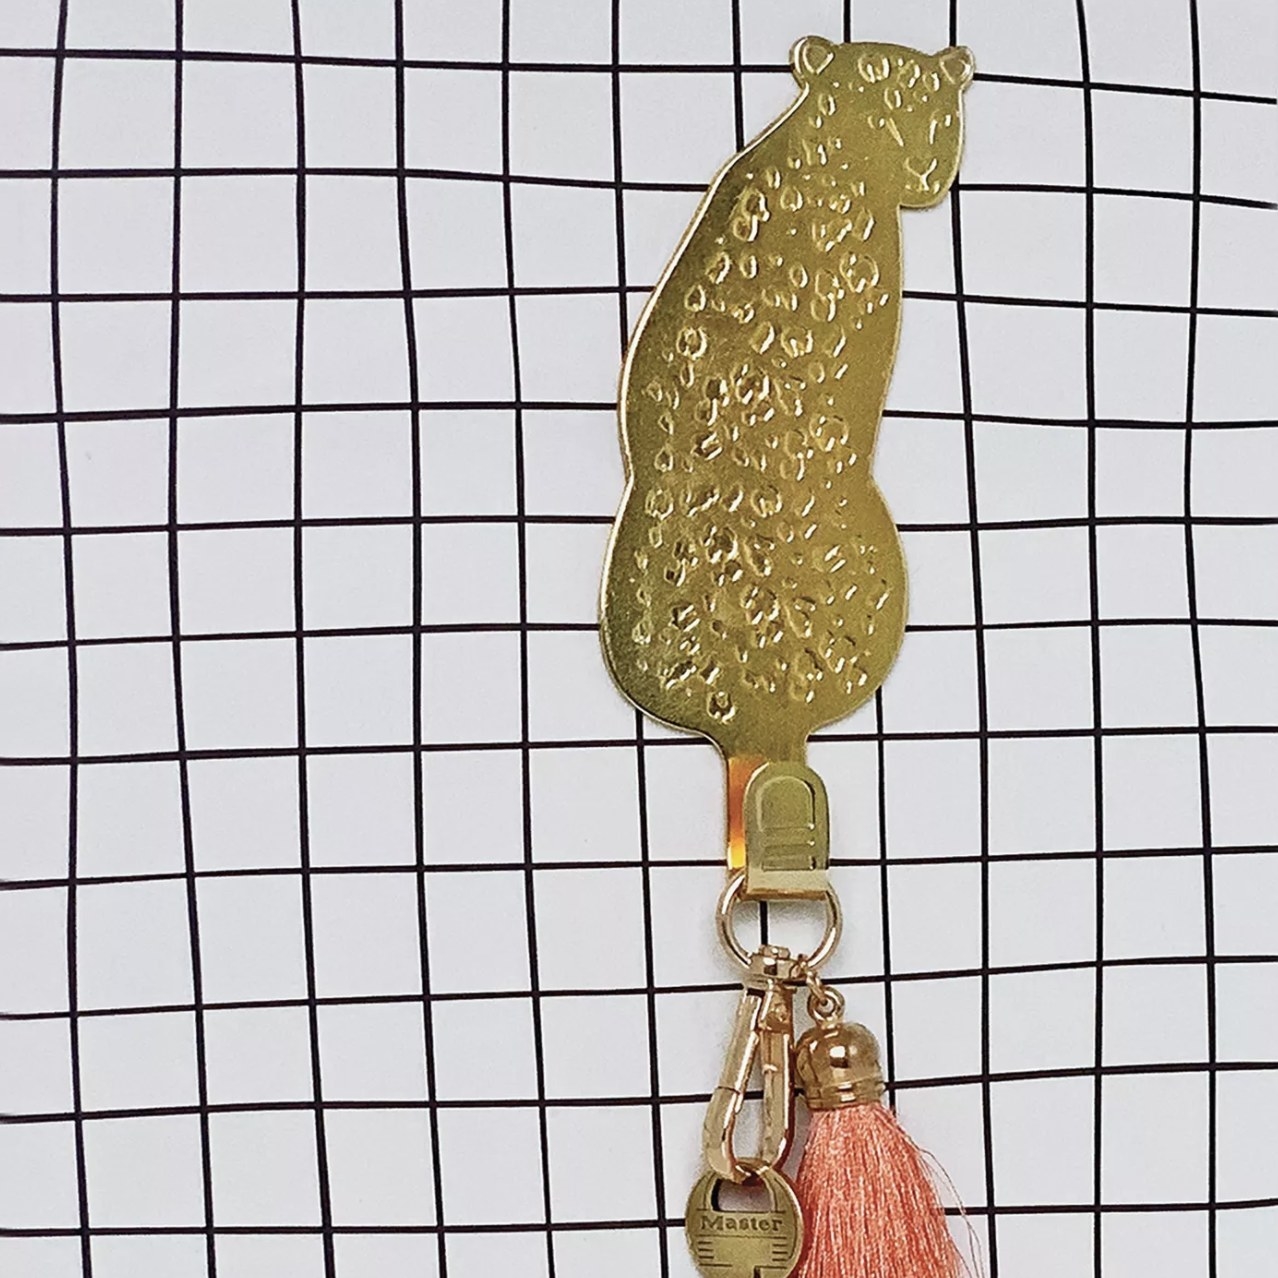 A cheetah hook against a checkered background holding a keychain